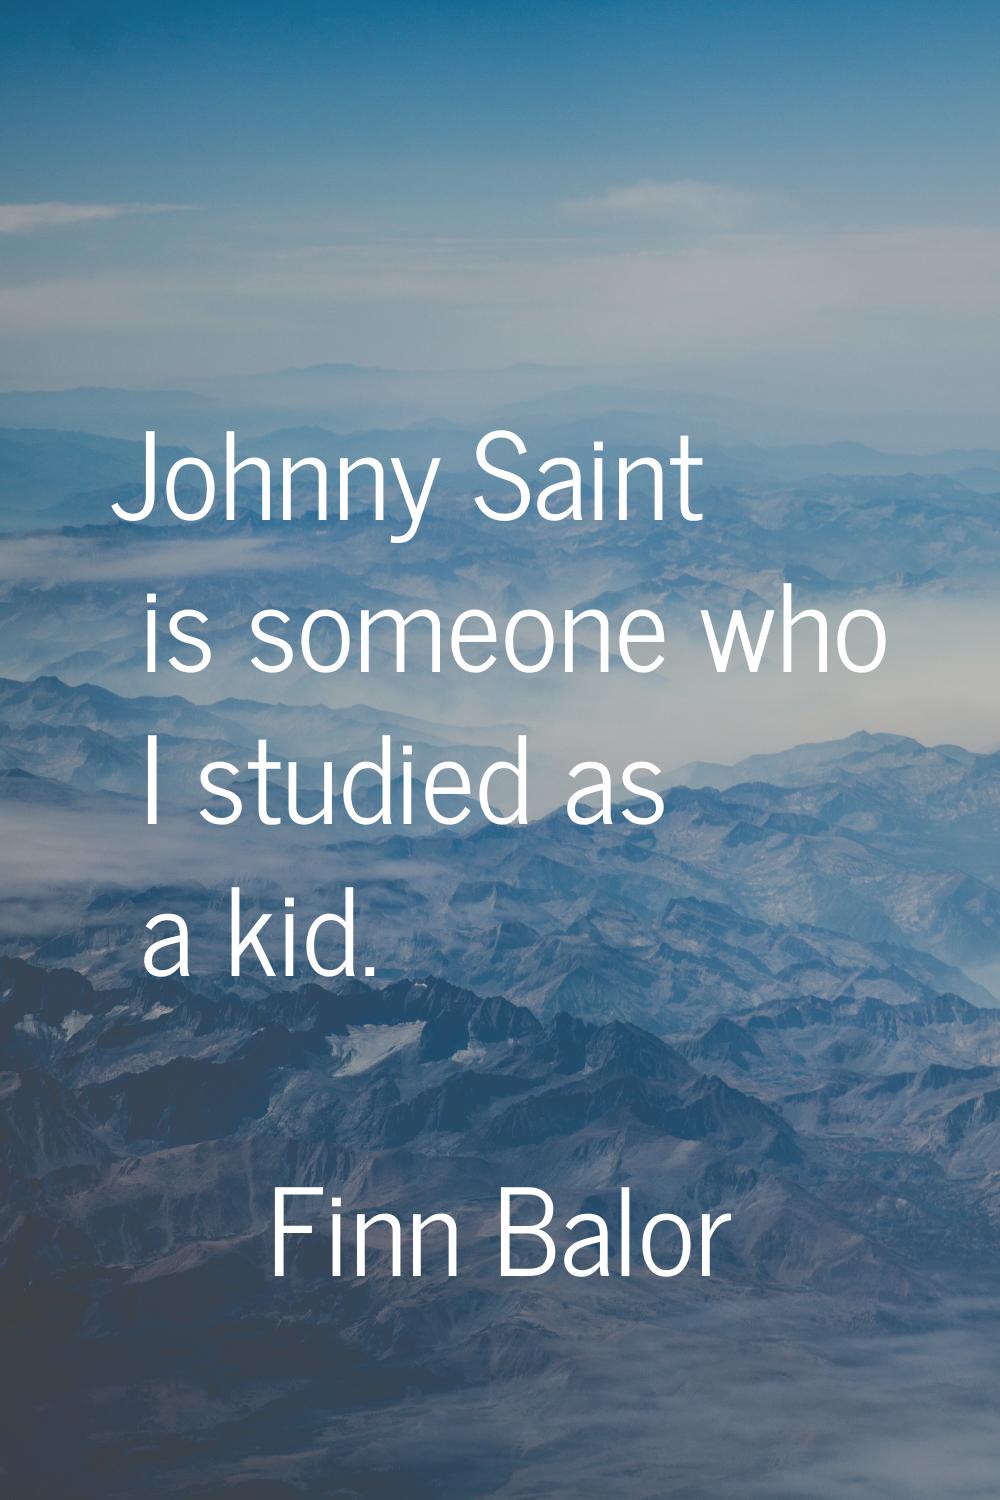 Johnny Saint is someone who I studied as a kid.